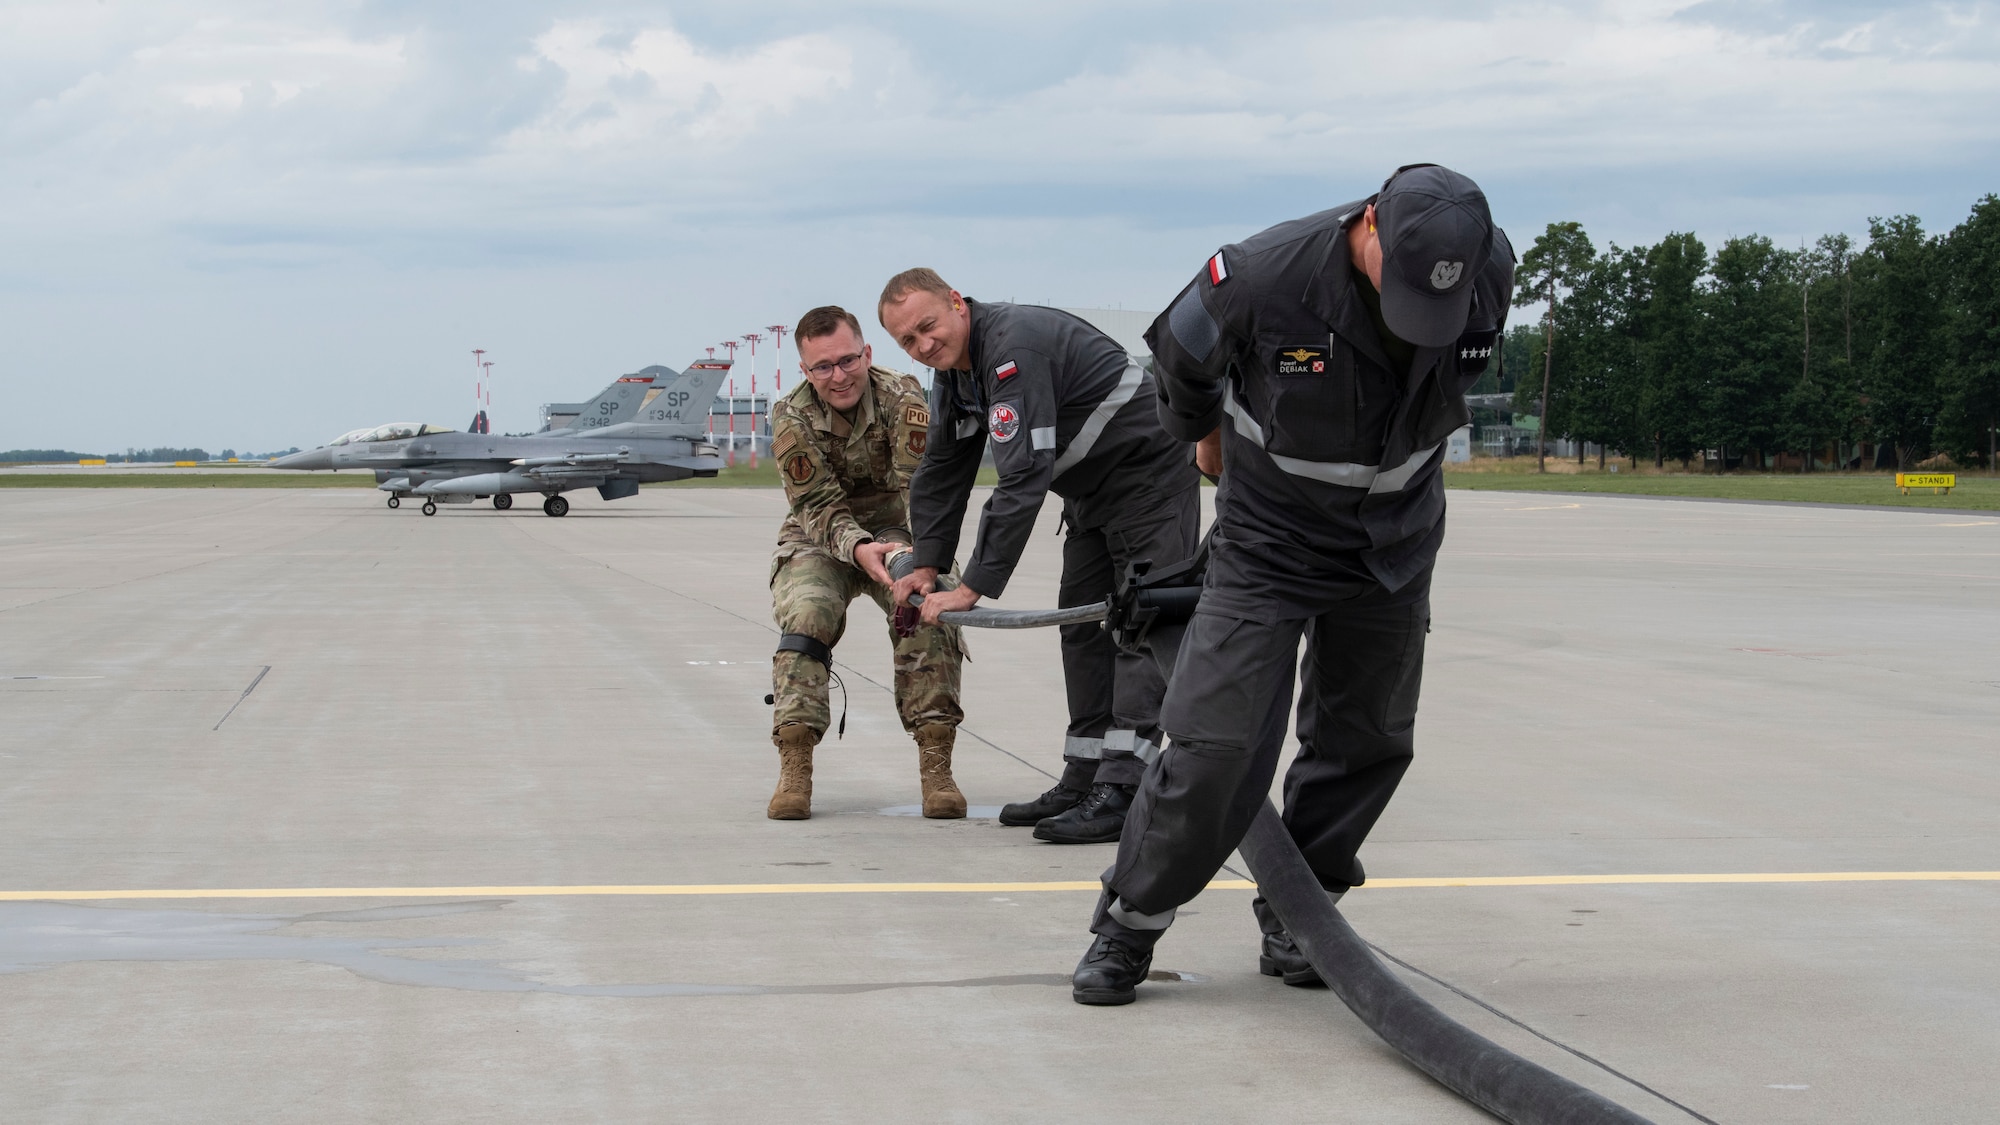 U.S. Air Force Master Sgt. Jason Yunker, 480th Expeditionary Fighter Squadron Fuels Management Flight operations superintendent (left), guides members of the Polish air force through a Versatile Integrating Partner Equipment Refueling Kit (VIPER) kit demonstration at Powidz Air Base, Poland, Aug. 10, 2021. U.S. Air Force Airmen from the 126th Air Refueling Wing at Scott Air Force Base, Ill., who are participating in the ADR, were also present during the demonstration and had the opportunity to both ask questions and test out the kit. (U.S. Air Force photo by Tech. Sgt. Anthony Plyler)